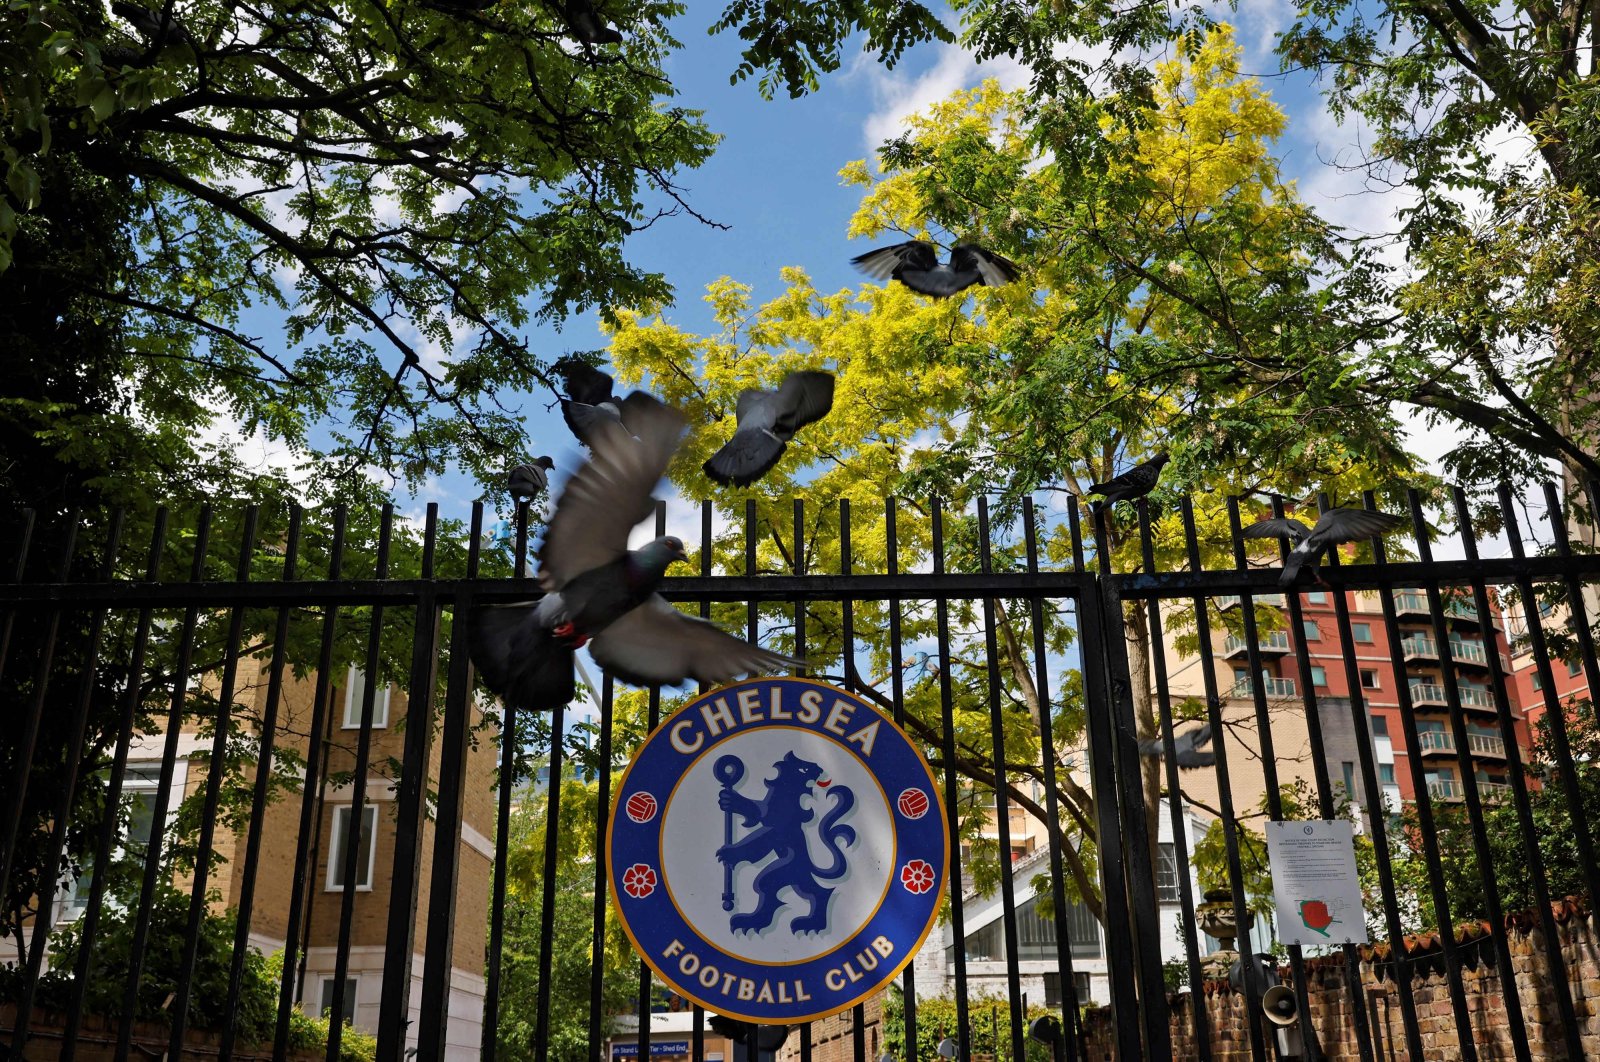 The Chelsea FC logo is seen outside the Stamford Bridge, London, England, May 24, 2022. (AFP Photo)